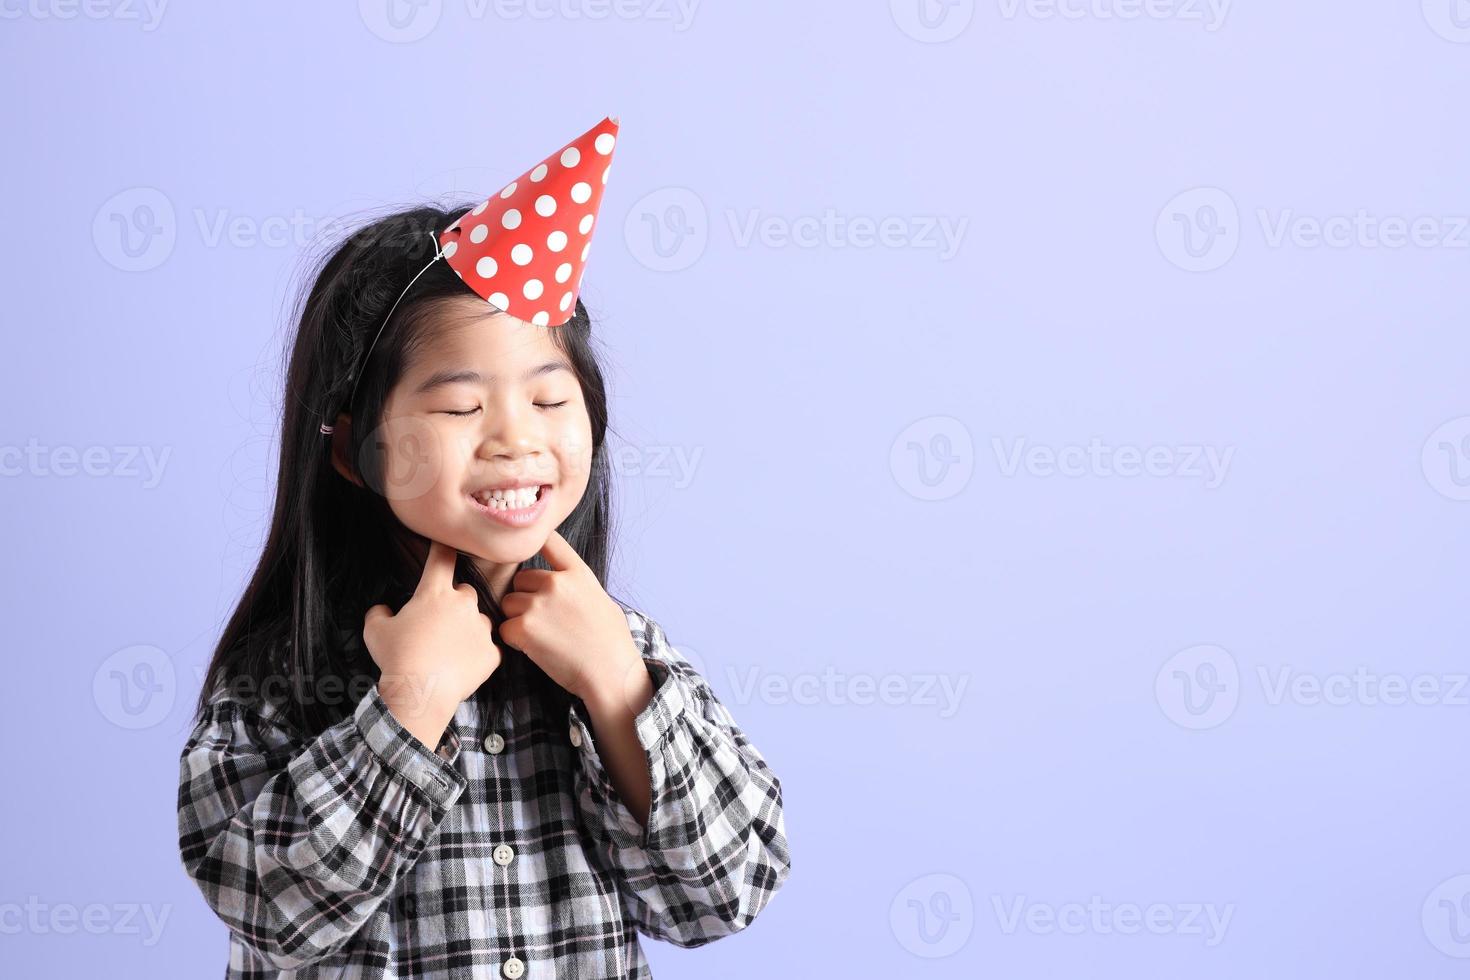 Happy Young Girl photo